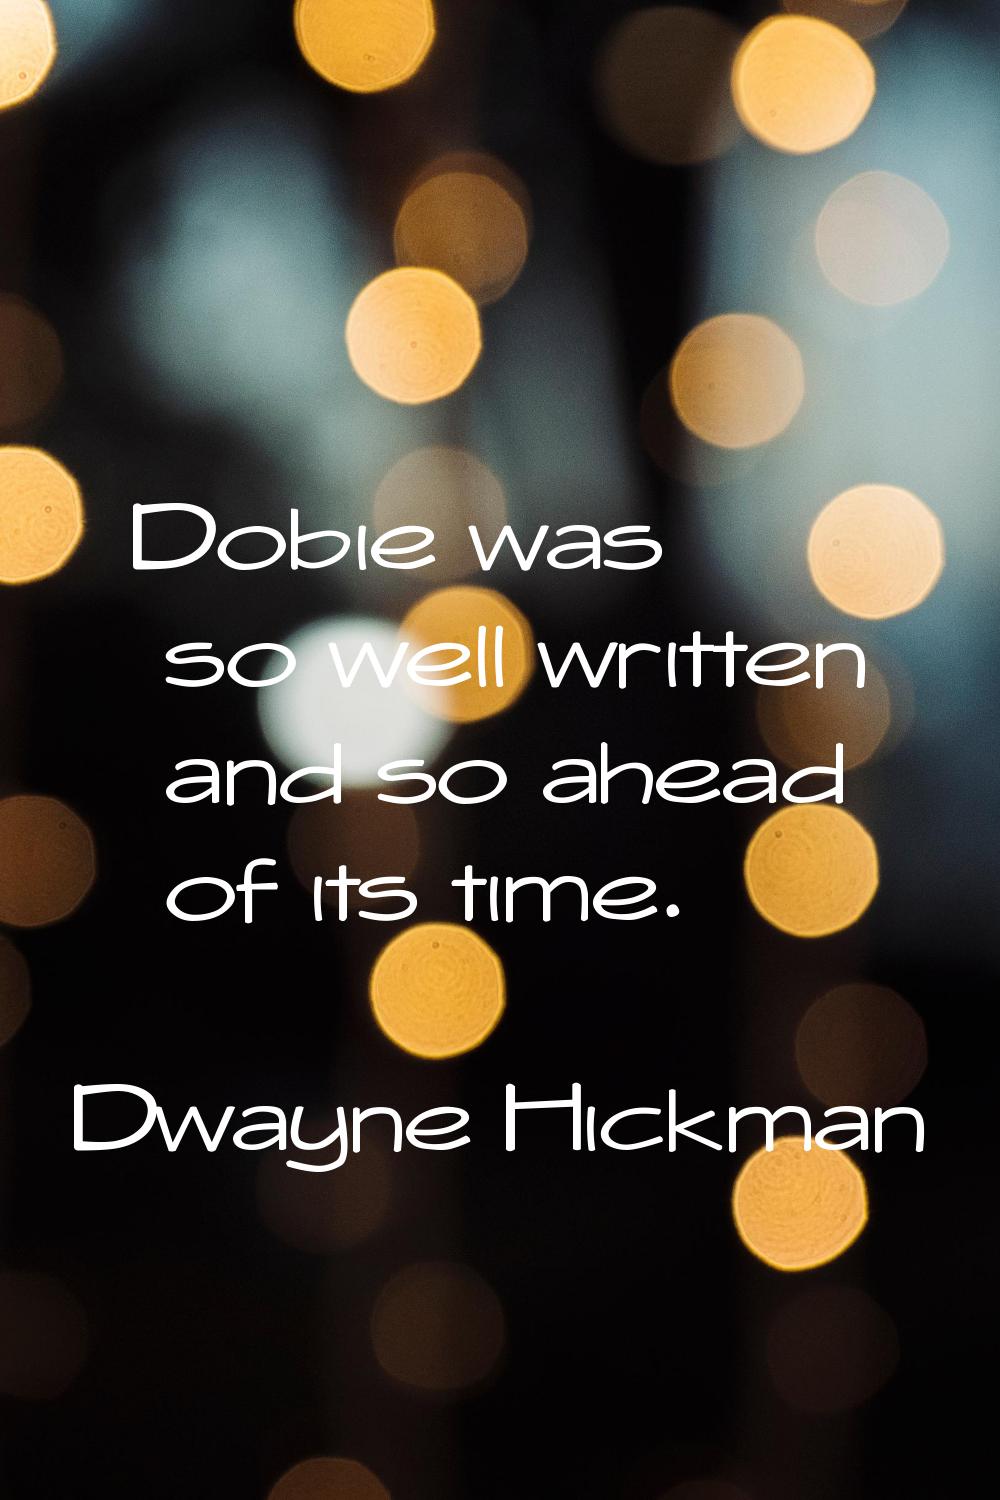 Dobie was so well written and so ahead of its time.